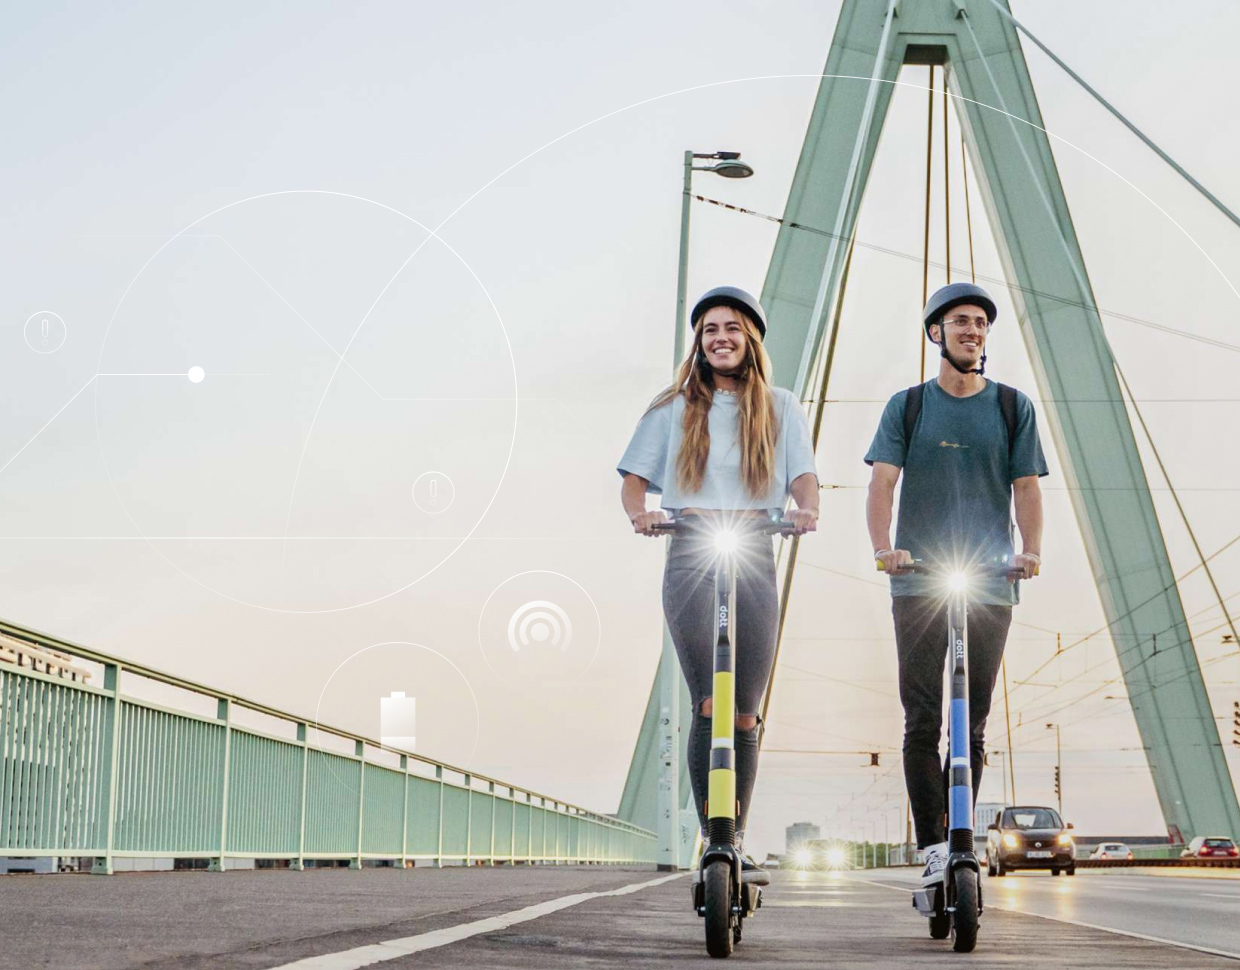 Micromobility trends in transportation R2llbapm